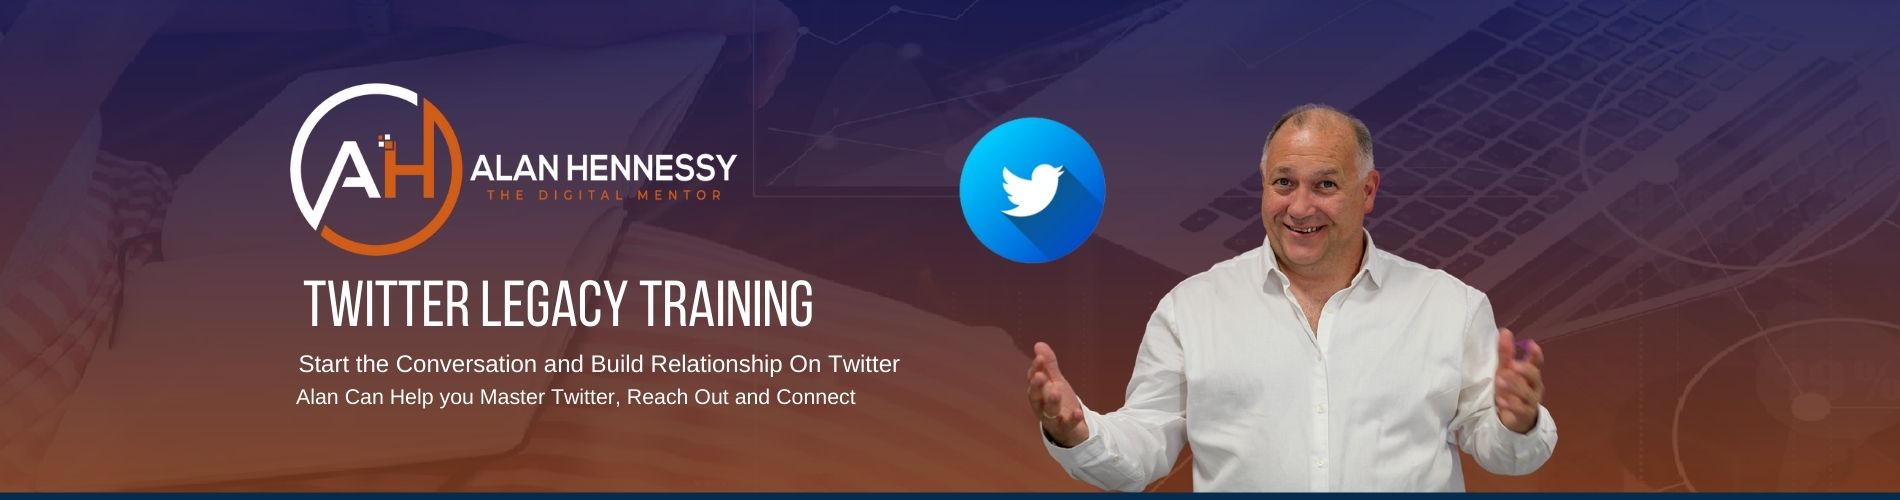 Twitter Training with Alan Hennessy - The Digital Mentor